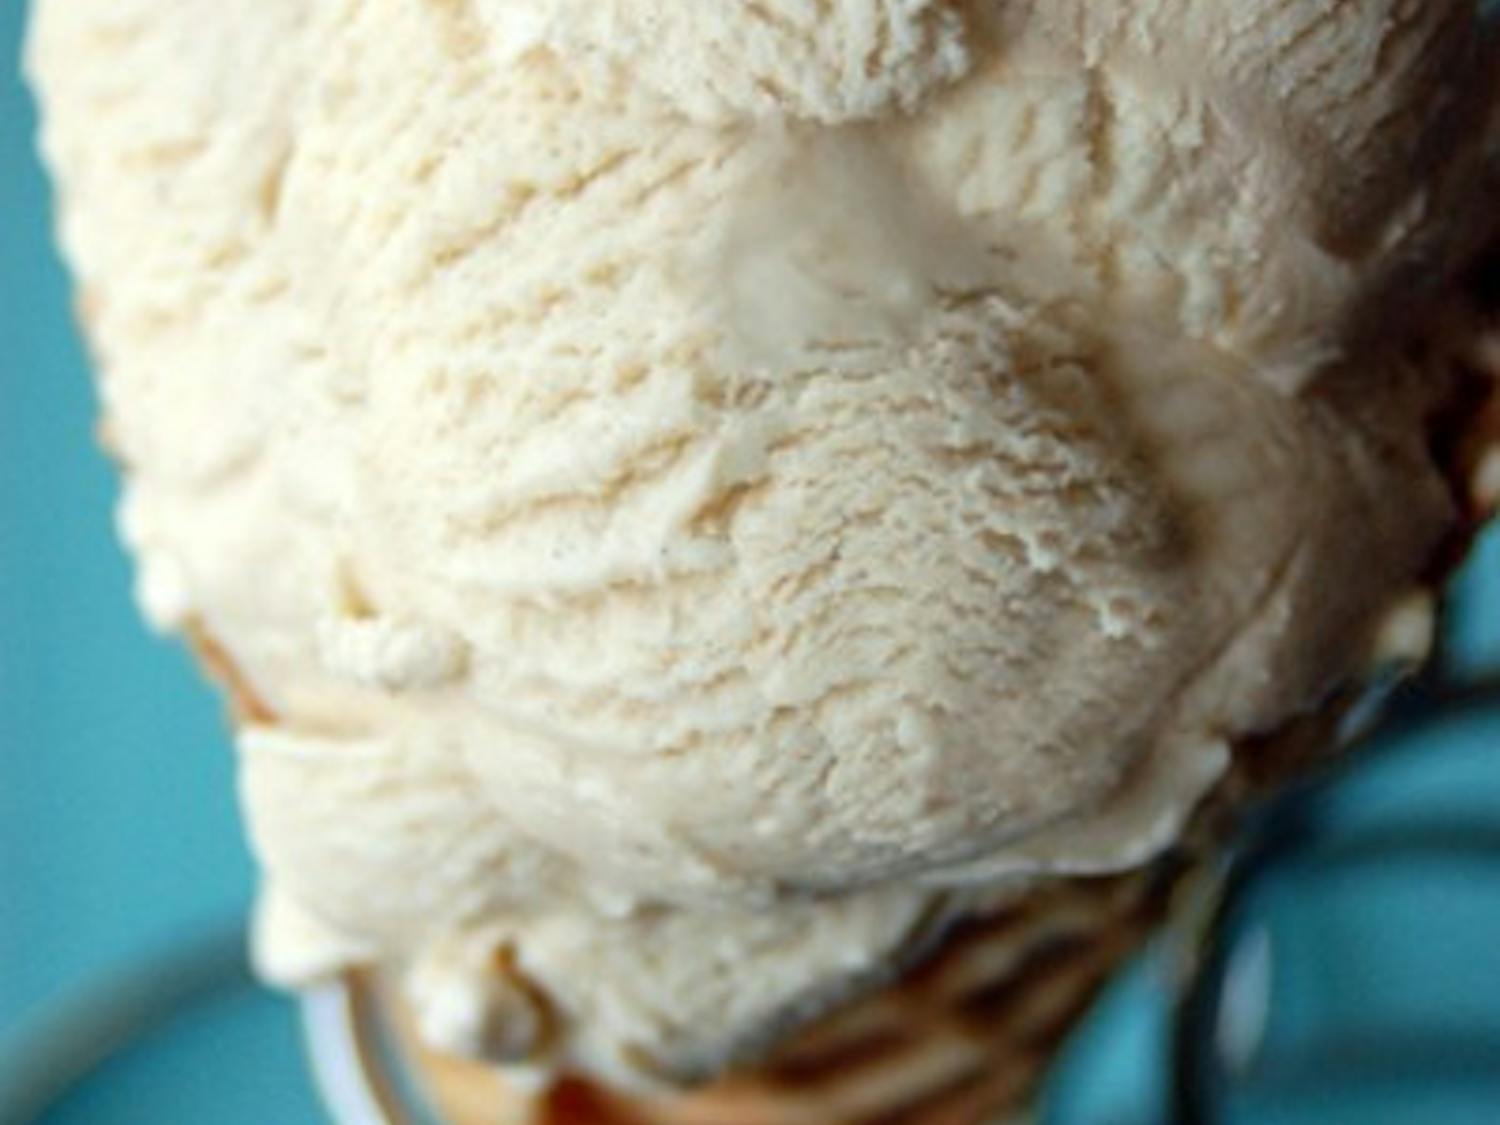 A scoop of organic, dairy-based cardamom ice cream at Karma Cream. The organic ice cream cafe offers a natural spin on favorite treats.